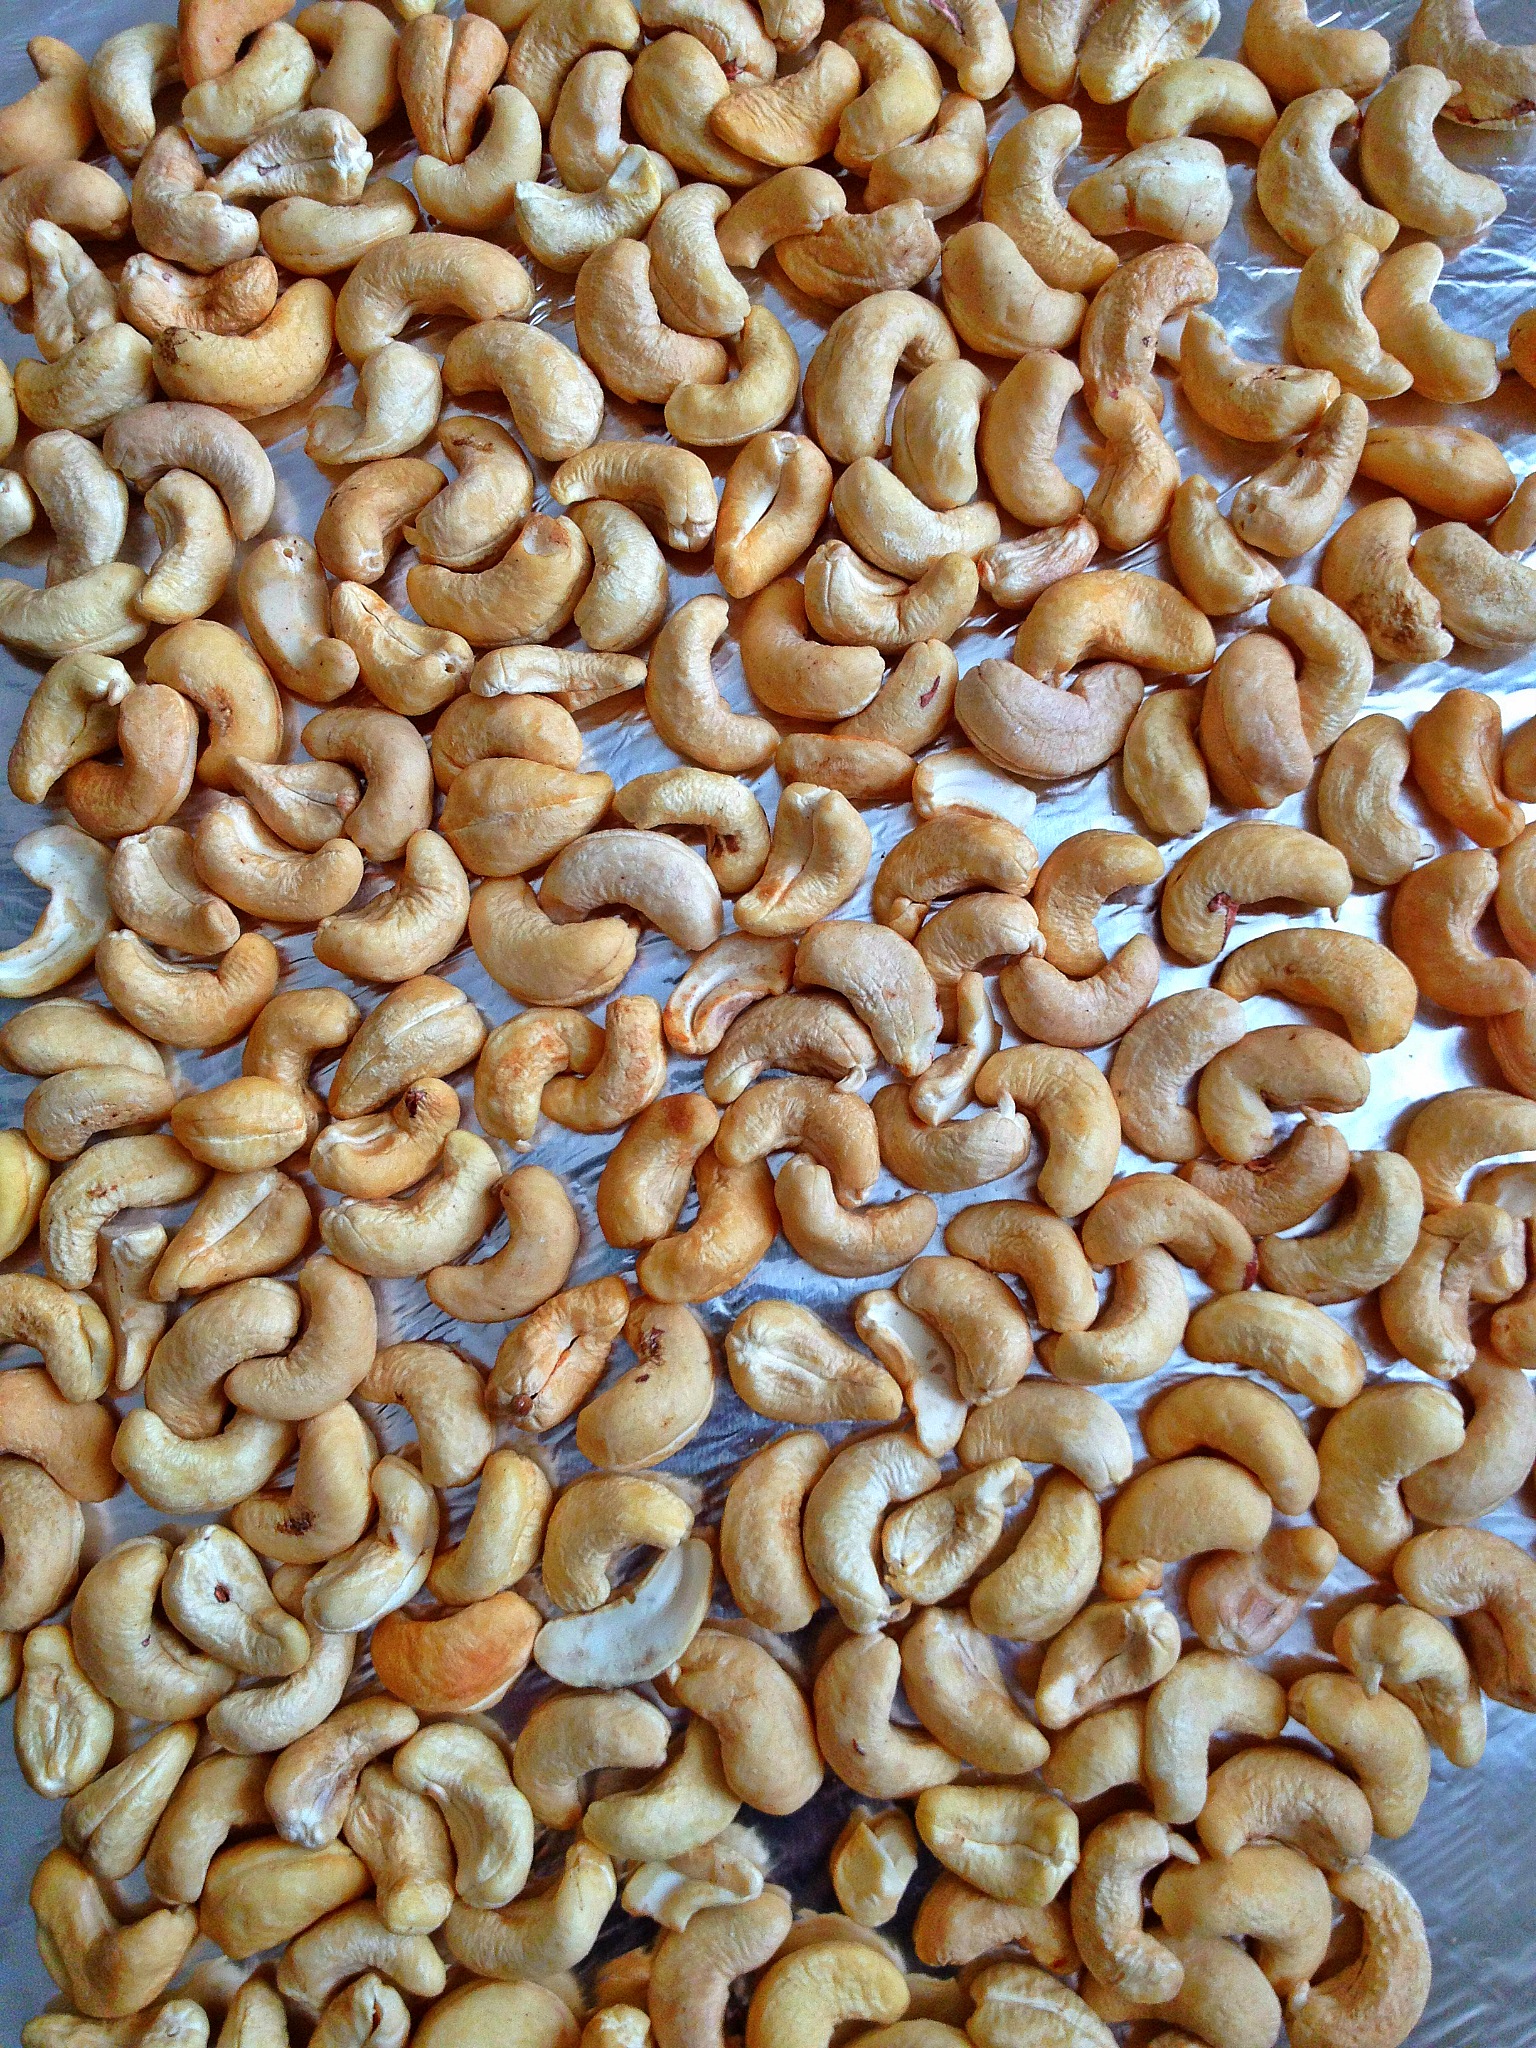 Unsalted, unroasted cashews